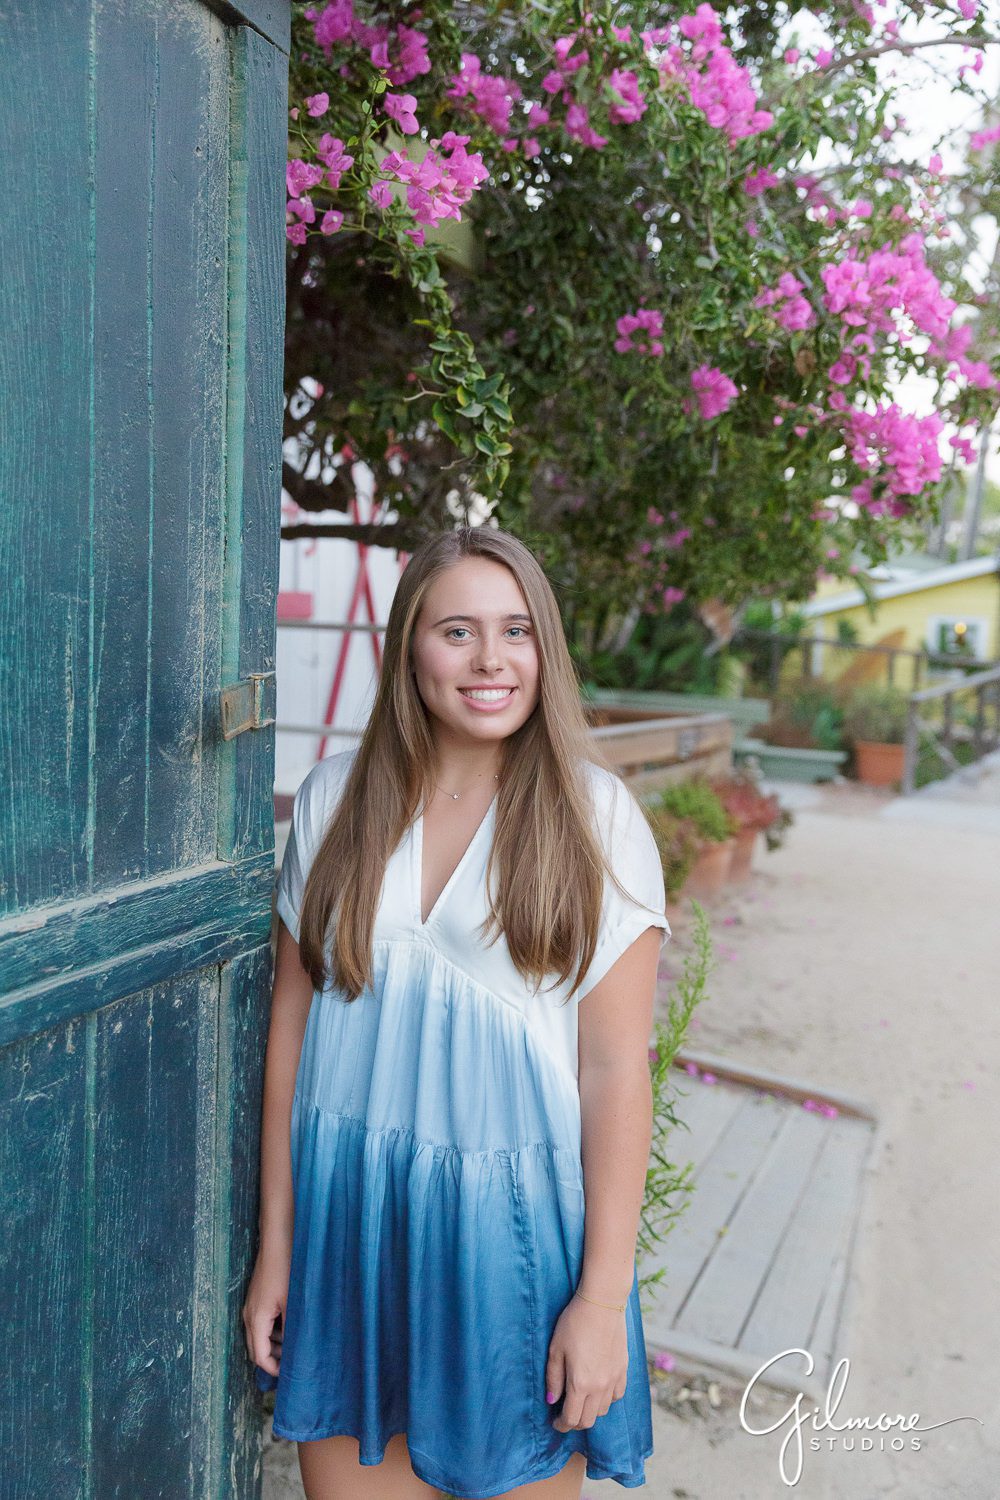 Senior portrait at the Crystal Cove cottages, State Park, Newport Beach